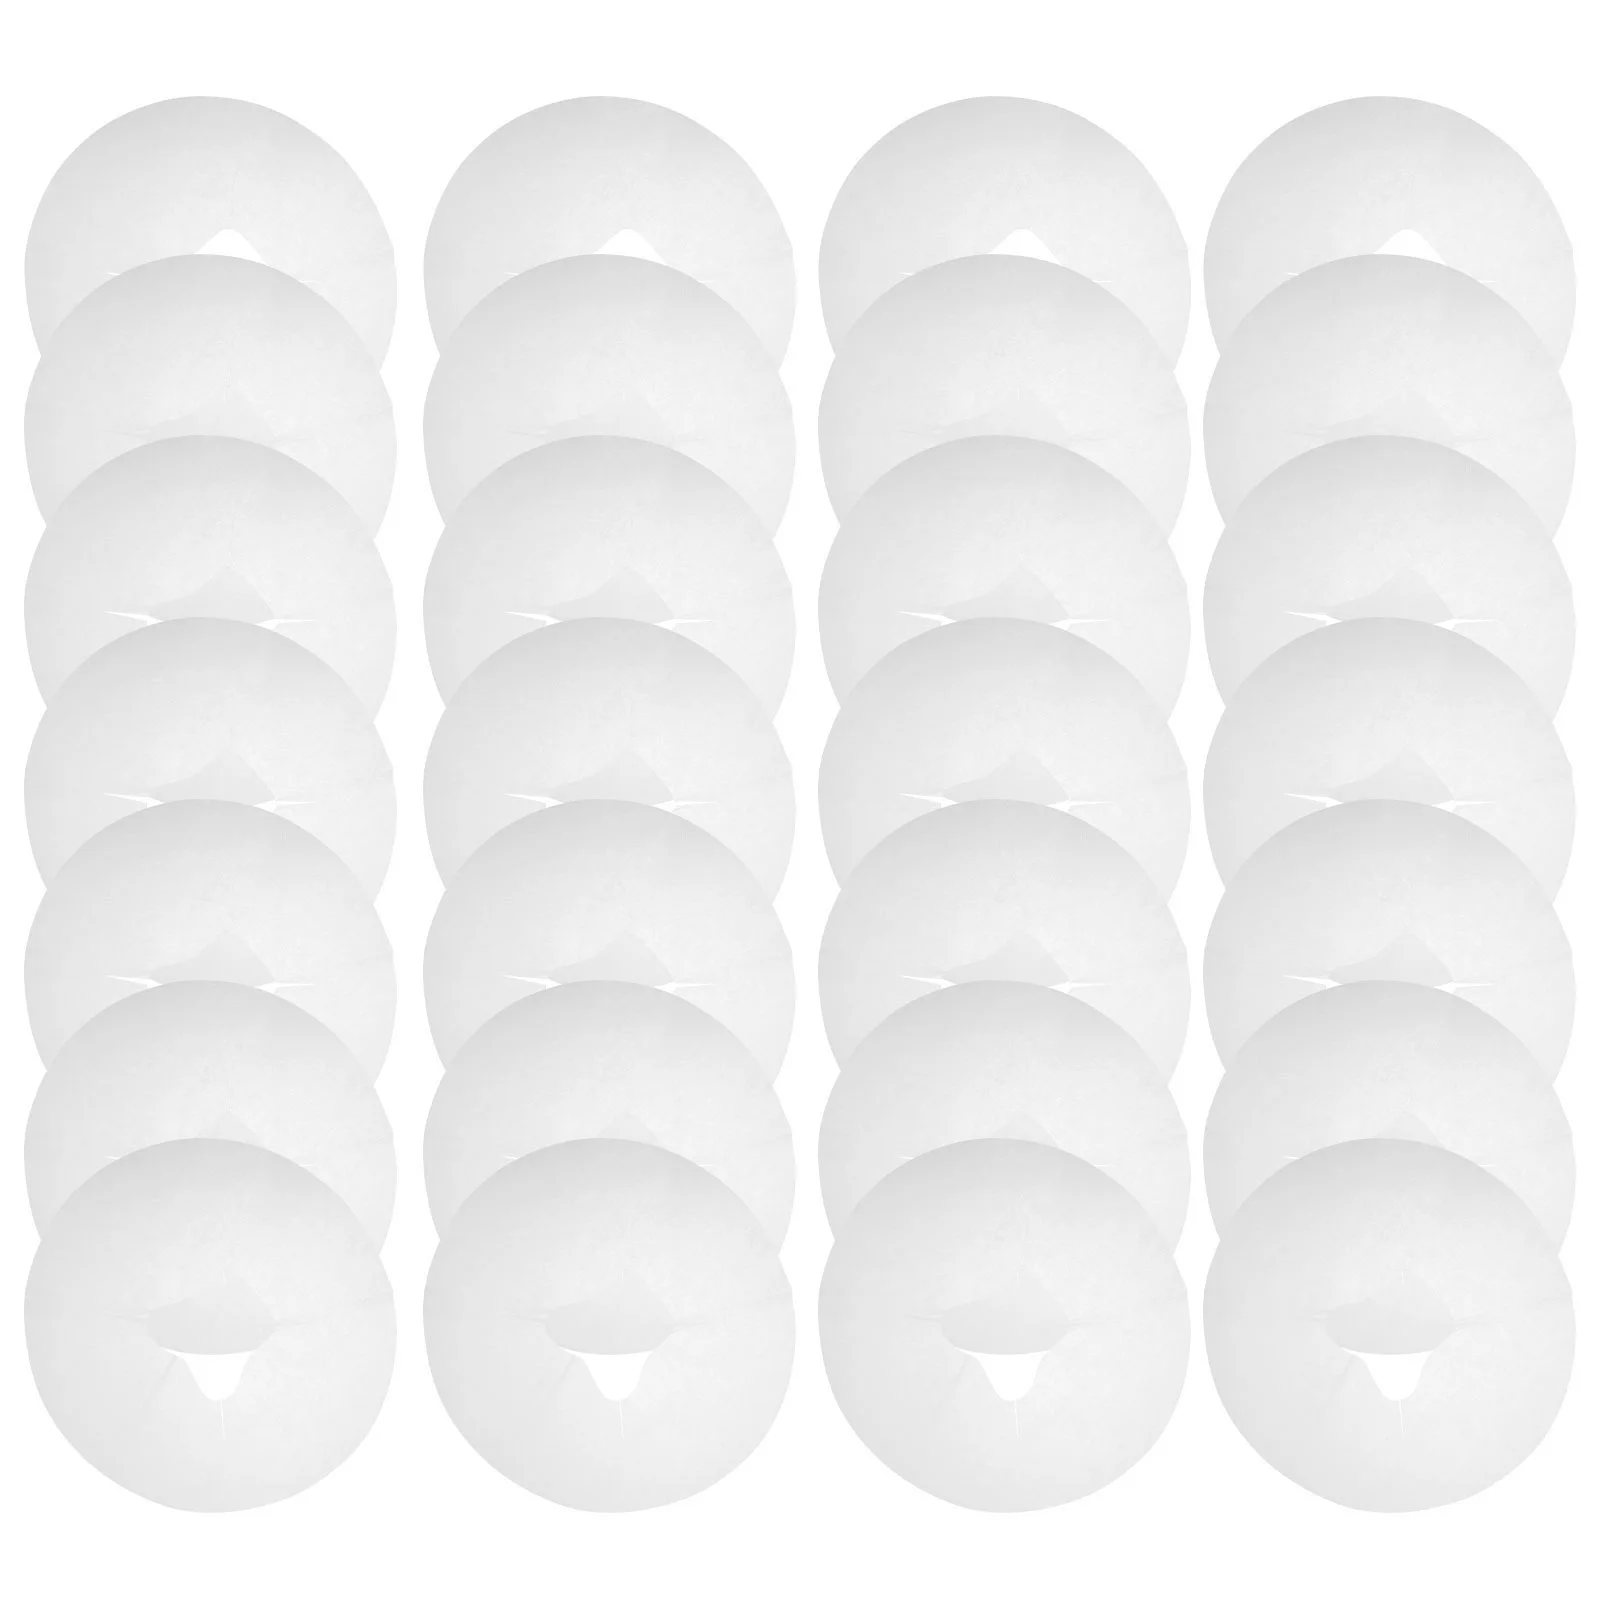 

100 Pcs Massage Pillow Body Cover Pillowcases Face Cradle Covers Disposable Non-woven Fabric Pad